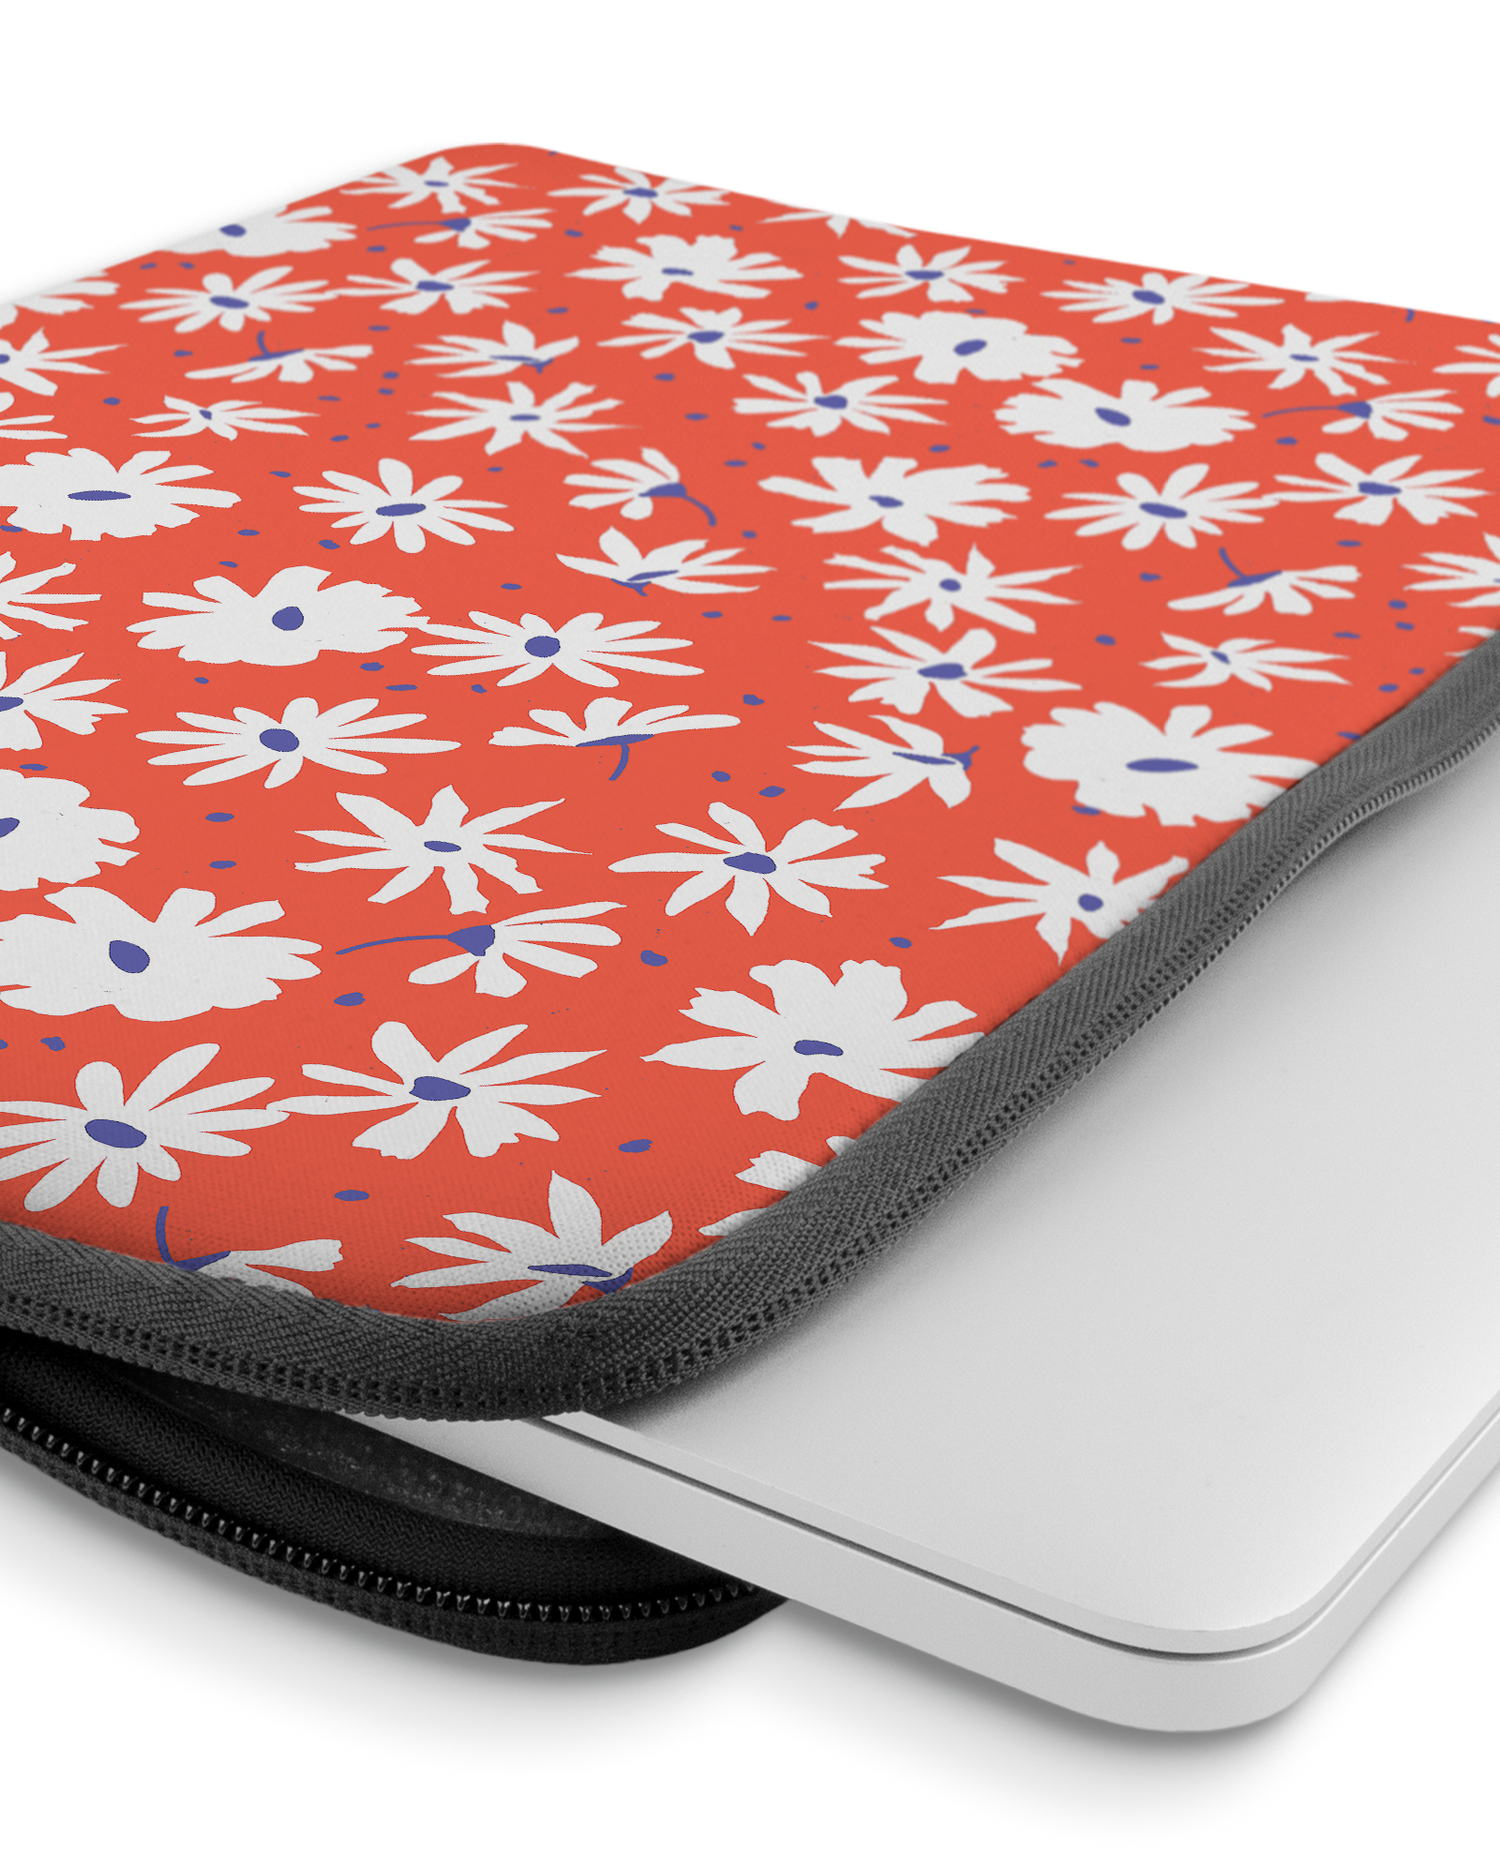 Retro Daisy Laptop Case 14 inch with device inside